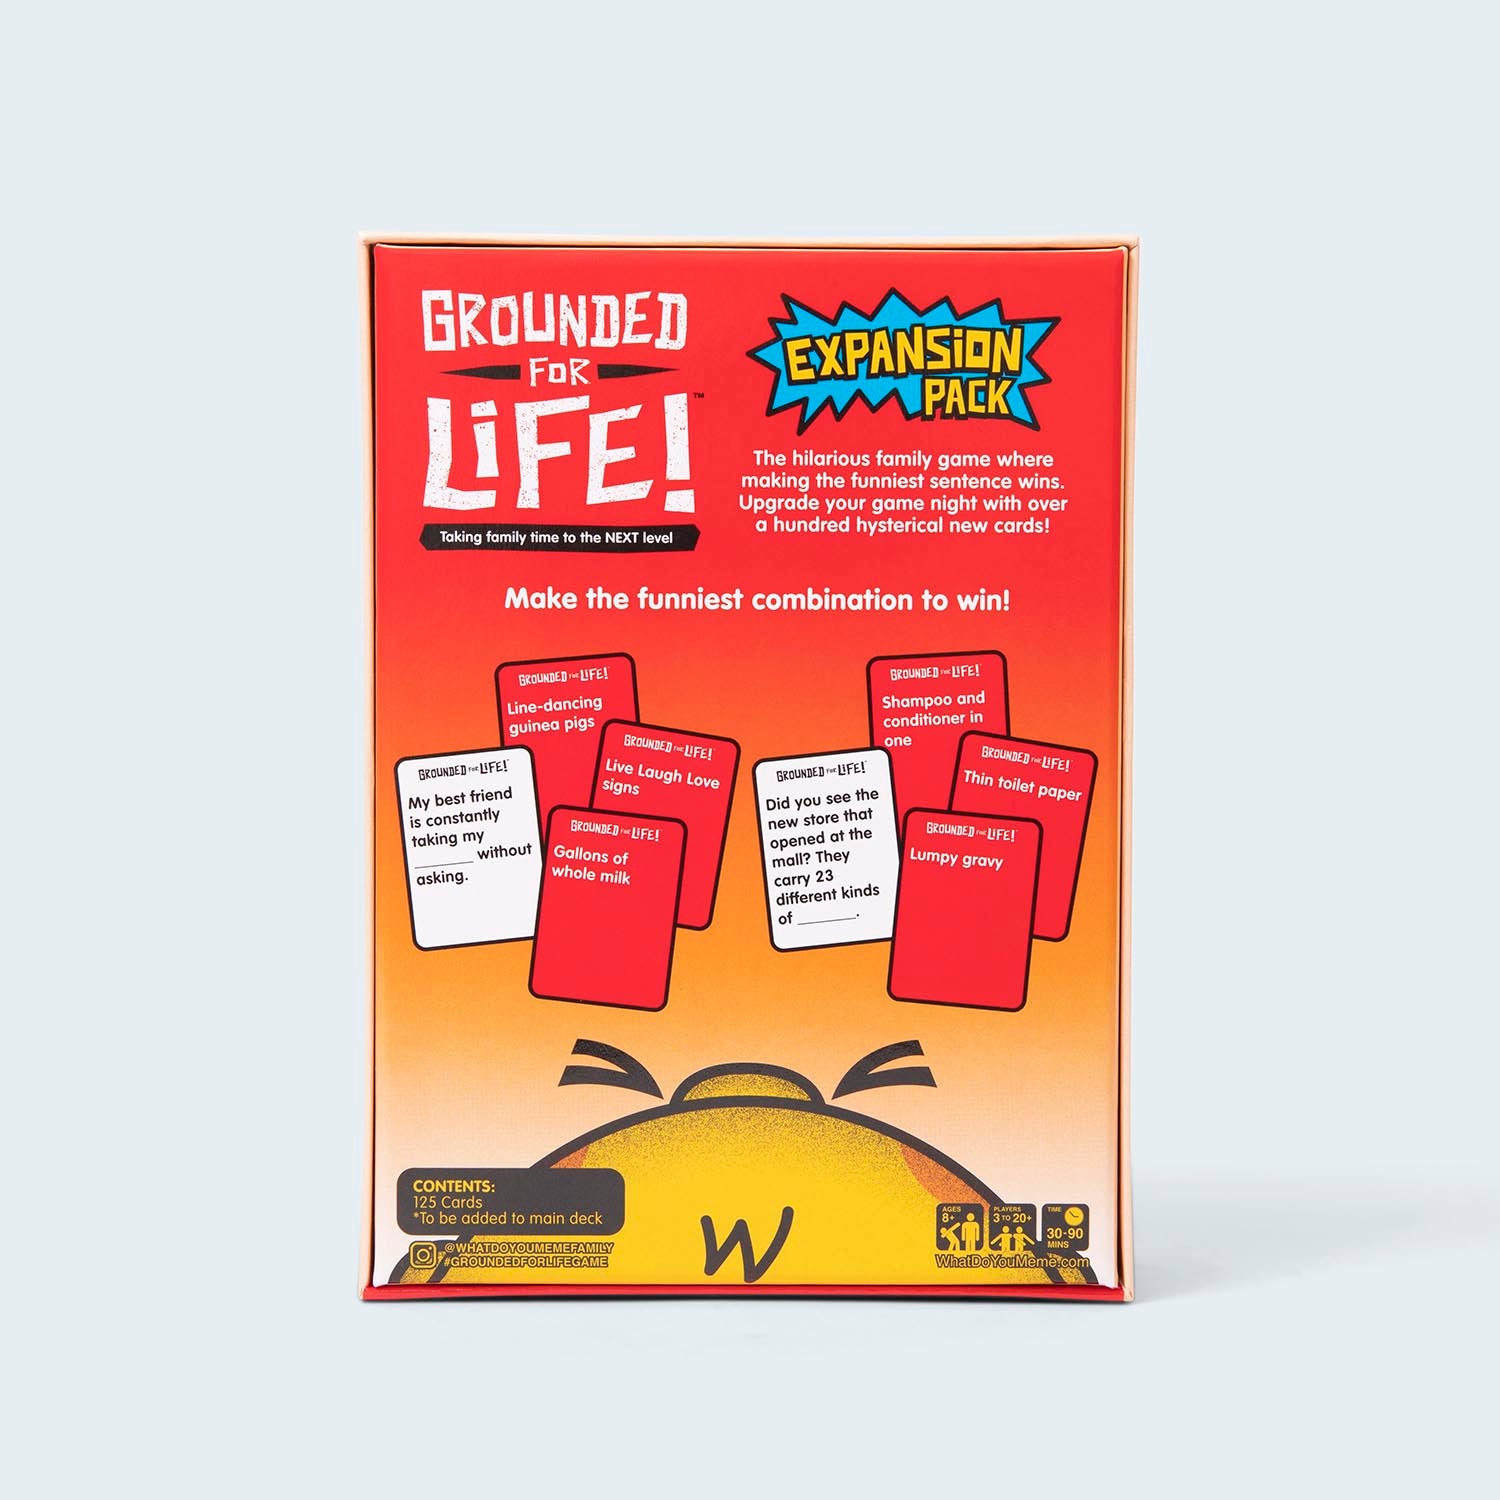 grounded-for-life-expansion-pack-game-box-and-game-play-04-what-do-you-meme-by-relatable